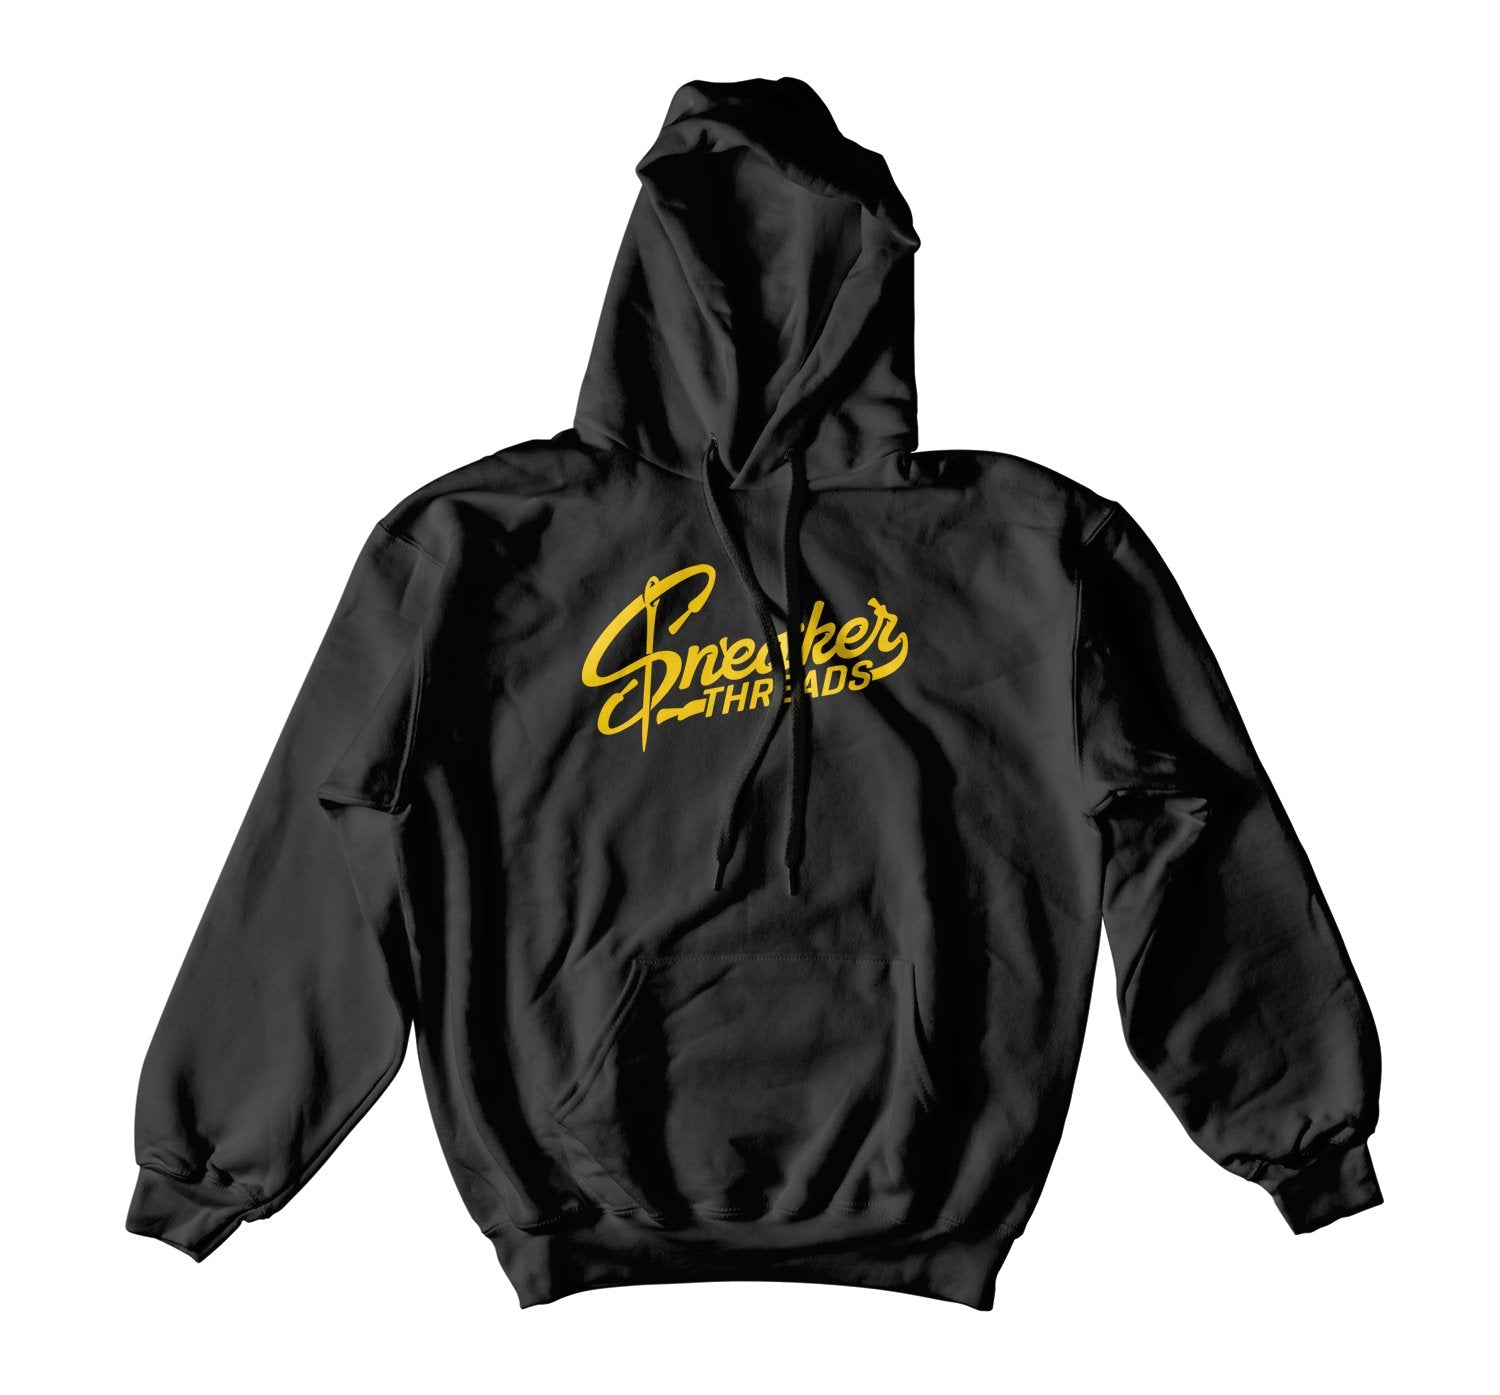 Sneakershirts Original Hoodies for Reverse taxi 12's Release